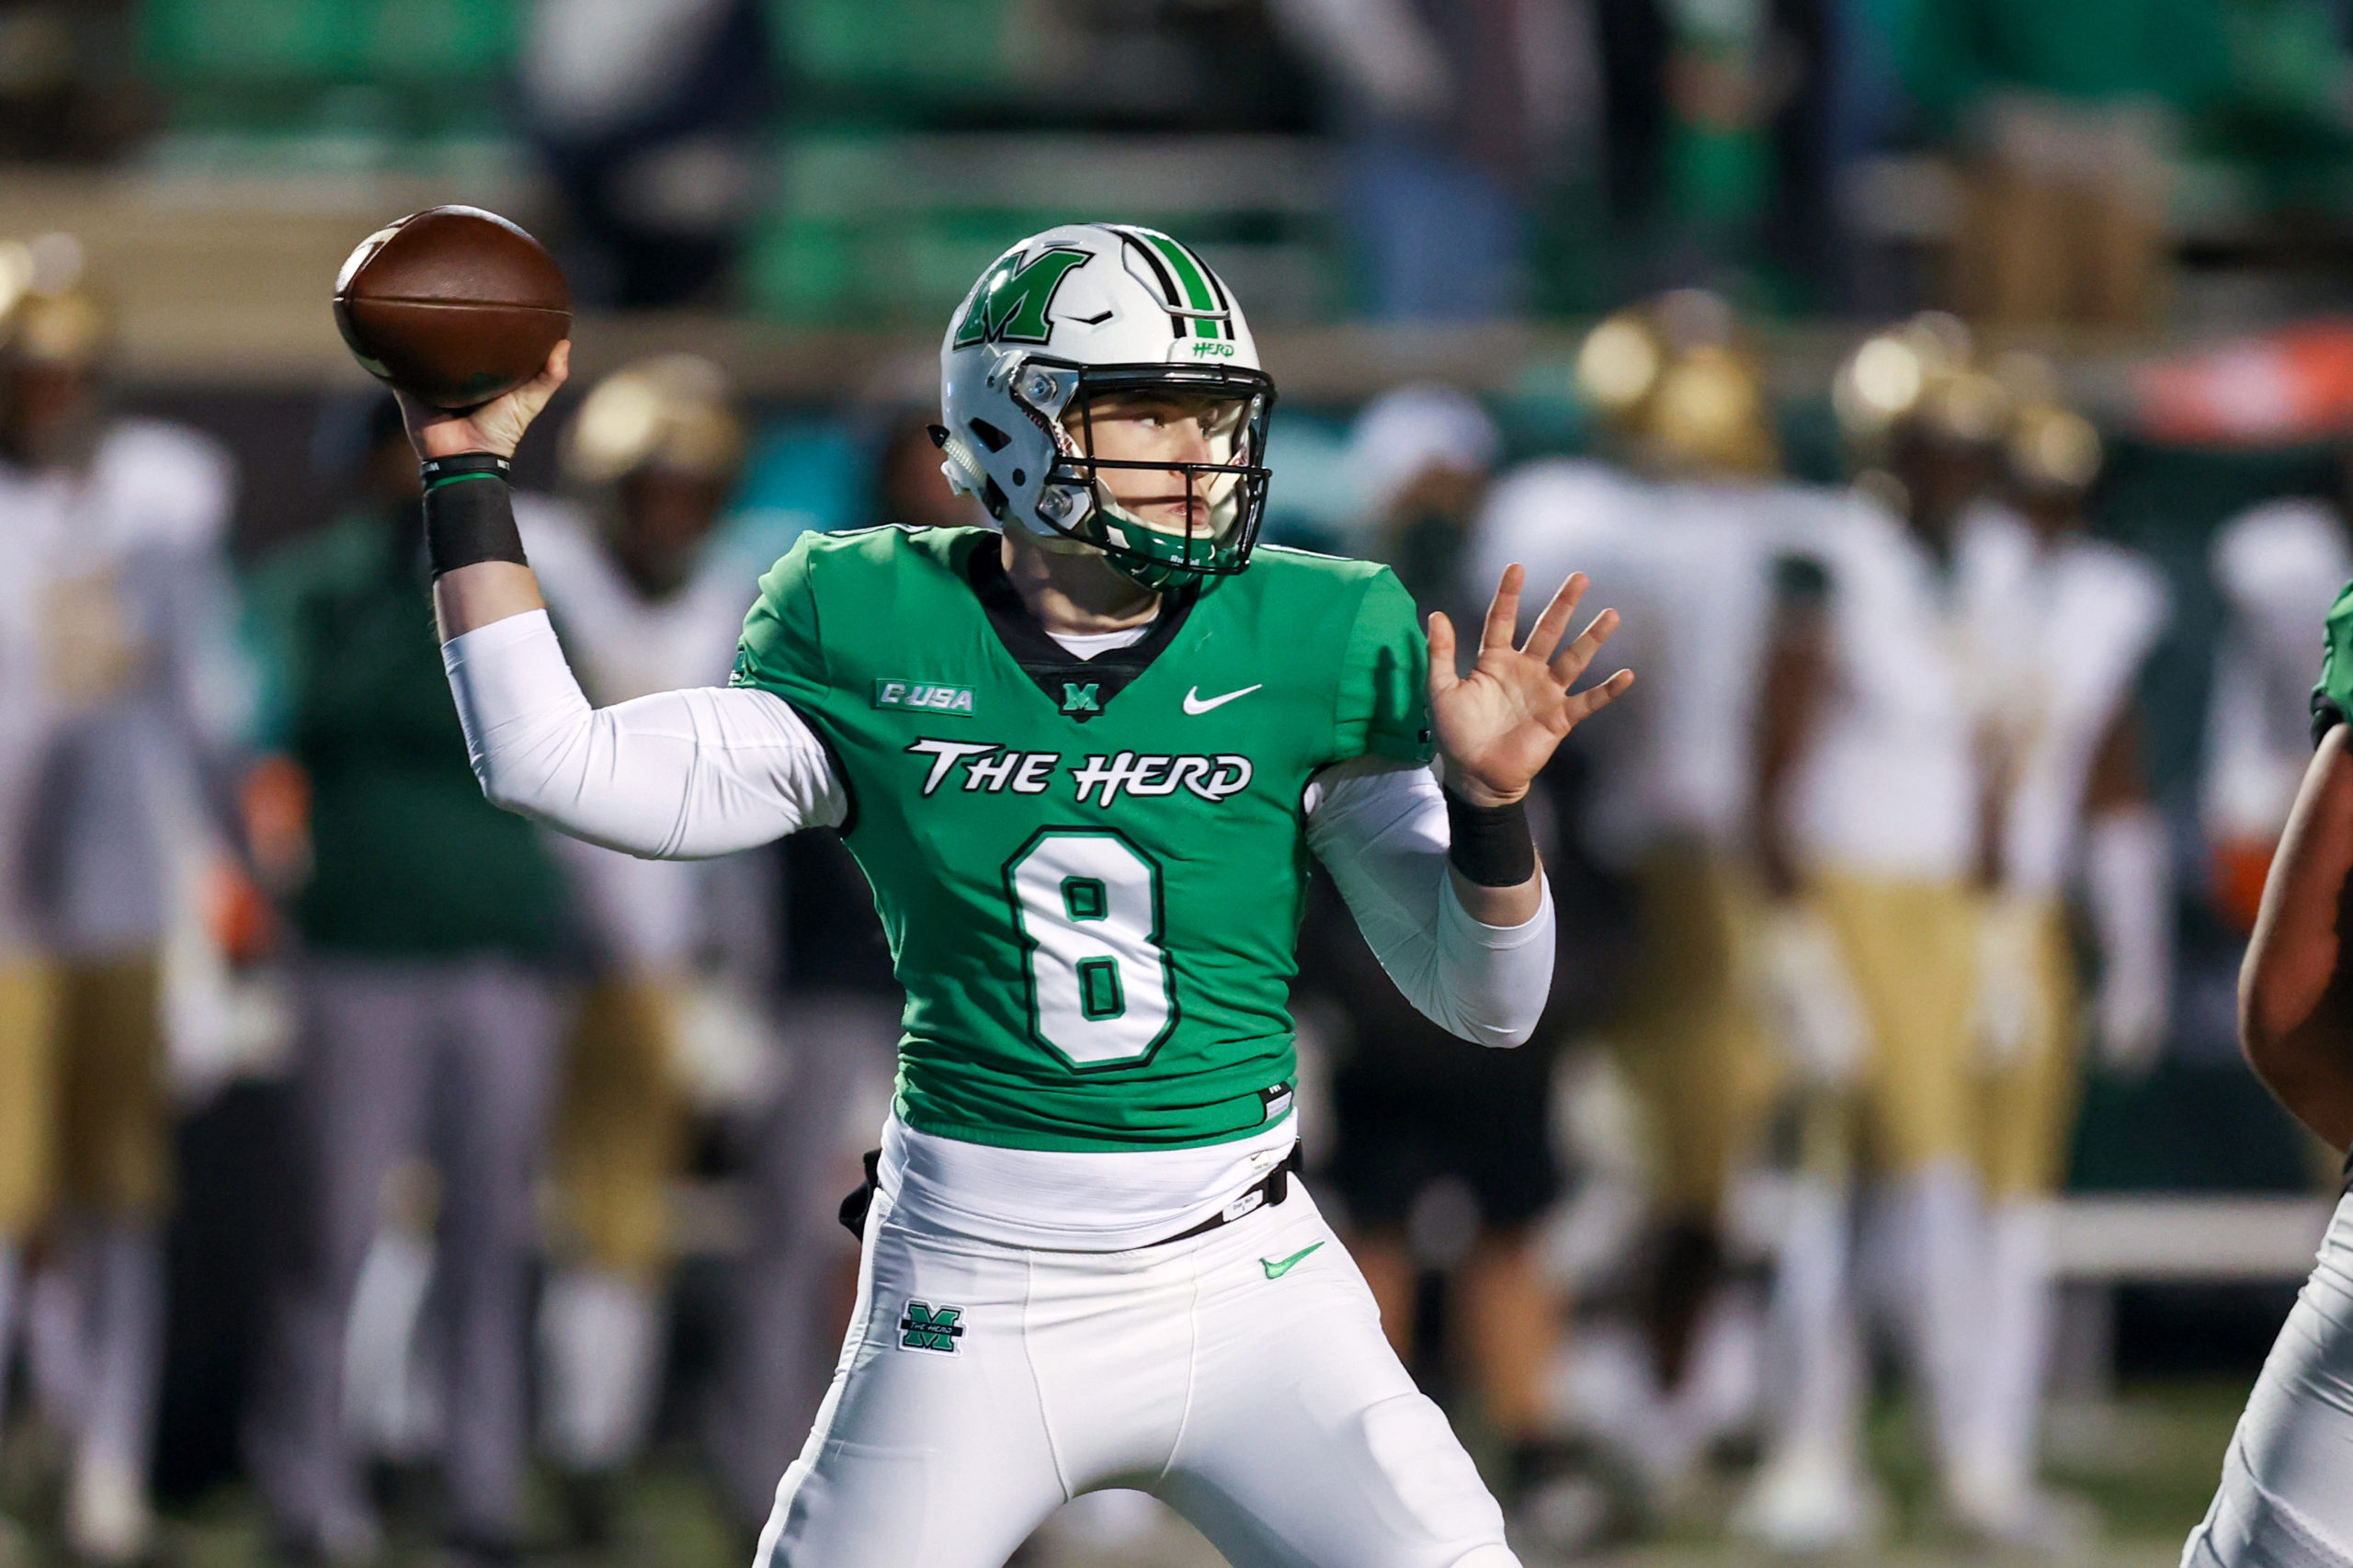 HUNTINGTON, WV - DECEMBER 18: Marshall Thundering Herd quarterback Grant Wells (8) throws a pass during the fourth quarter of the 2020 Ryan C-USA Football Championship Game between the UAB Blazers and the Marshall Thundering Herd on October 24, 2020, at Joan C. Edwards Stadium in Huntington, WV. (Photo by Frank Jansky/Icon Sportswire via Getty Images)